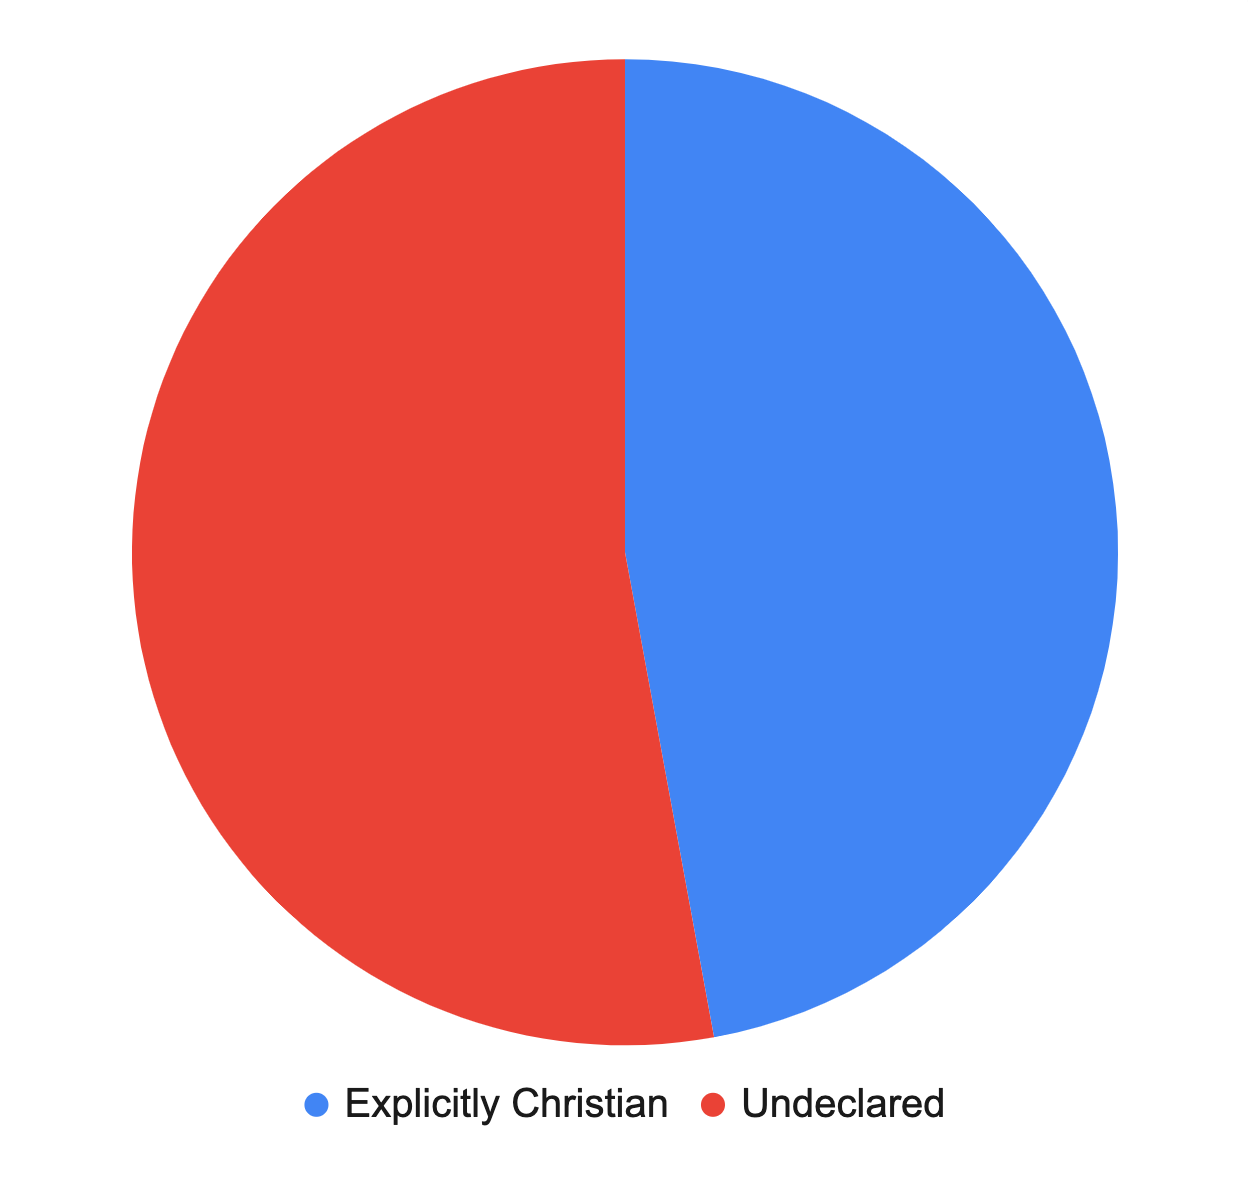 Simple pie chart showing almost half of treatment beds in Alberta being controlled by facilities that are explicitly Christian